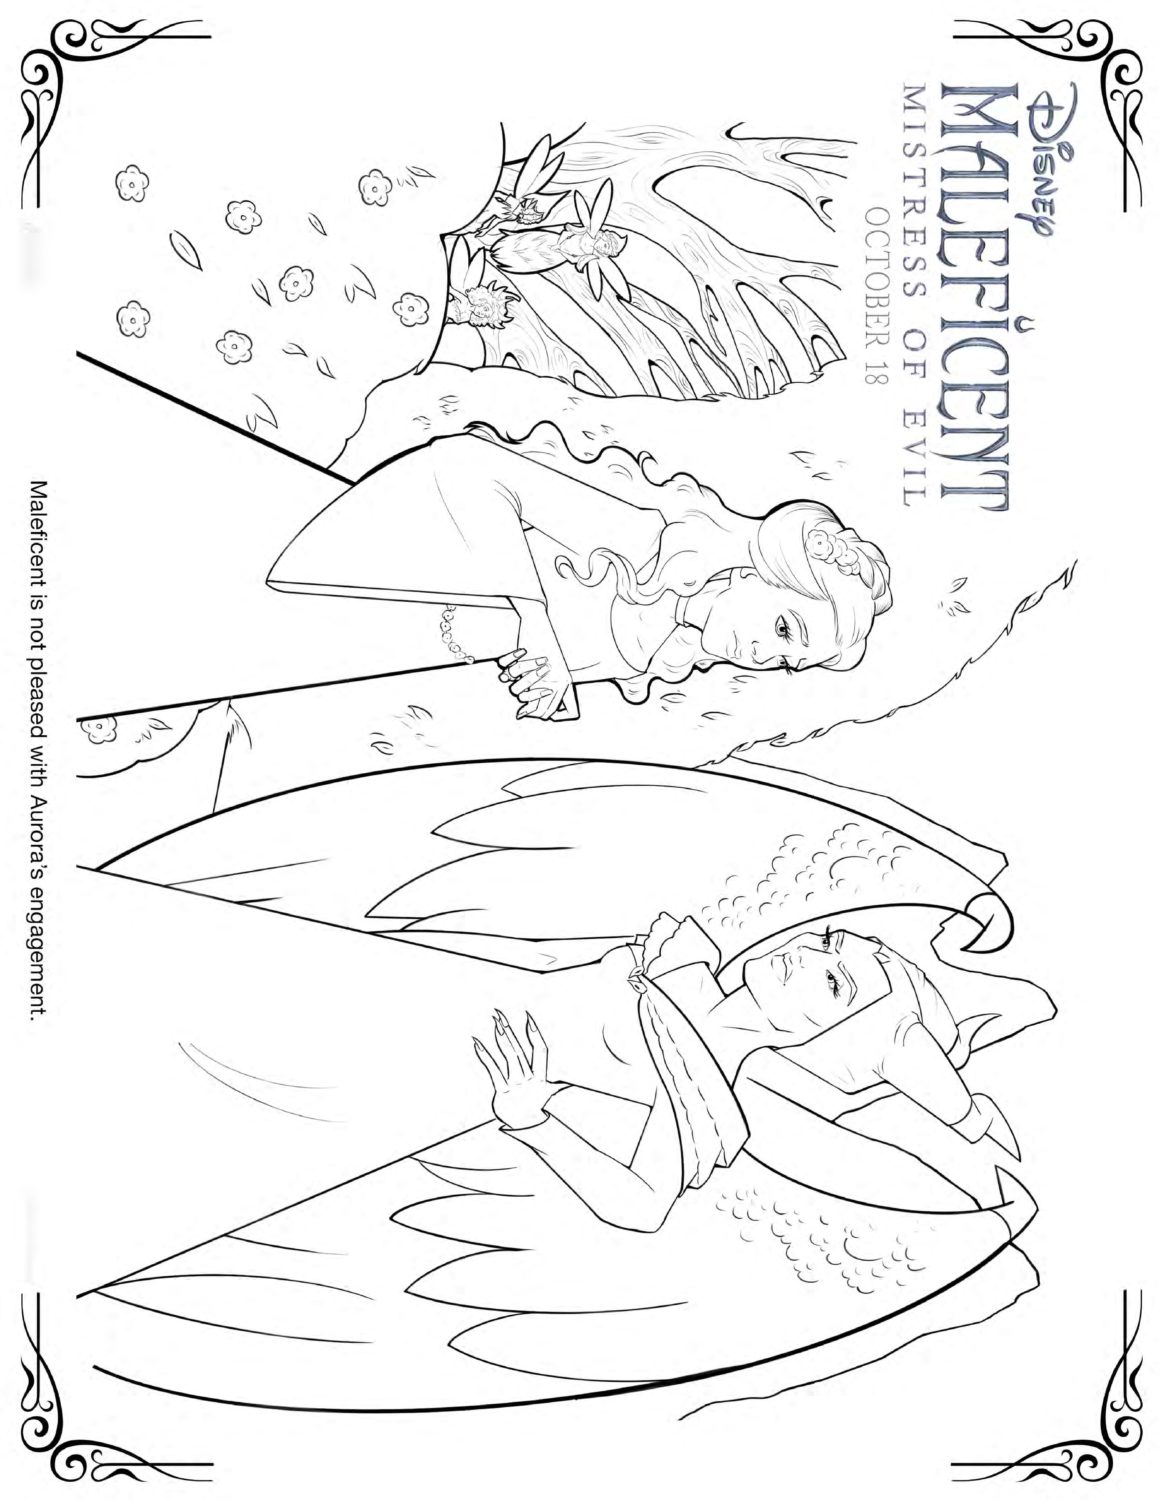 Maleficent 2 Angry Coloring Pages and Activity Sheets